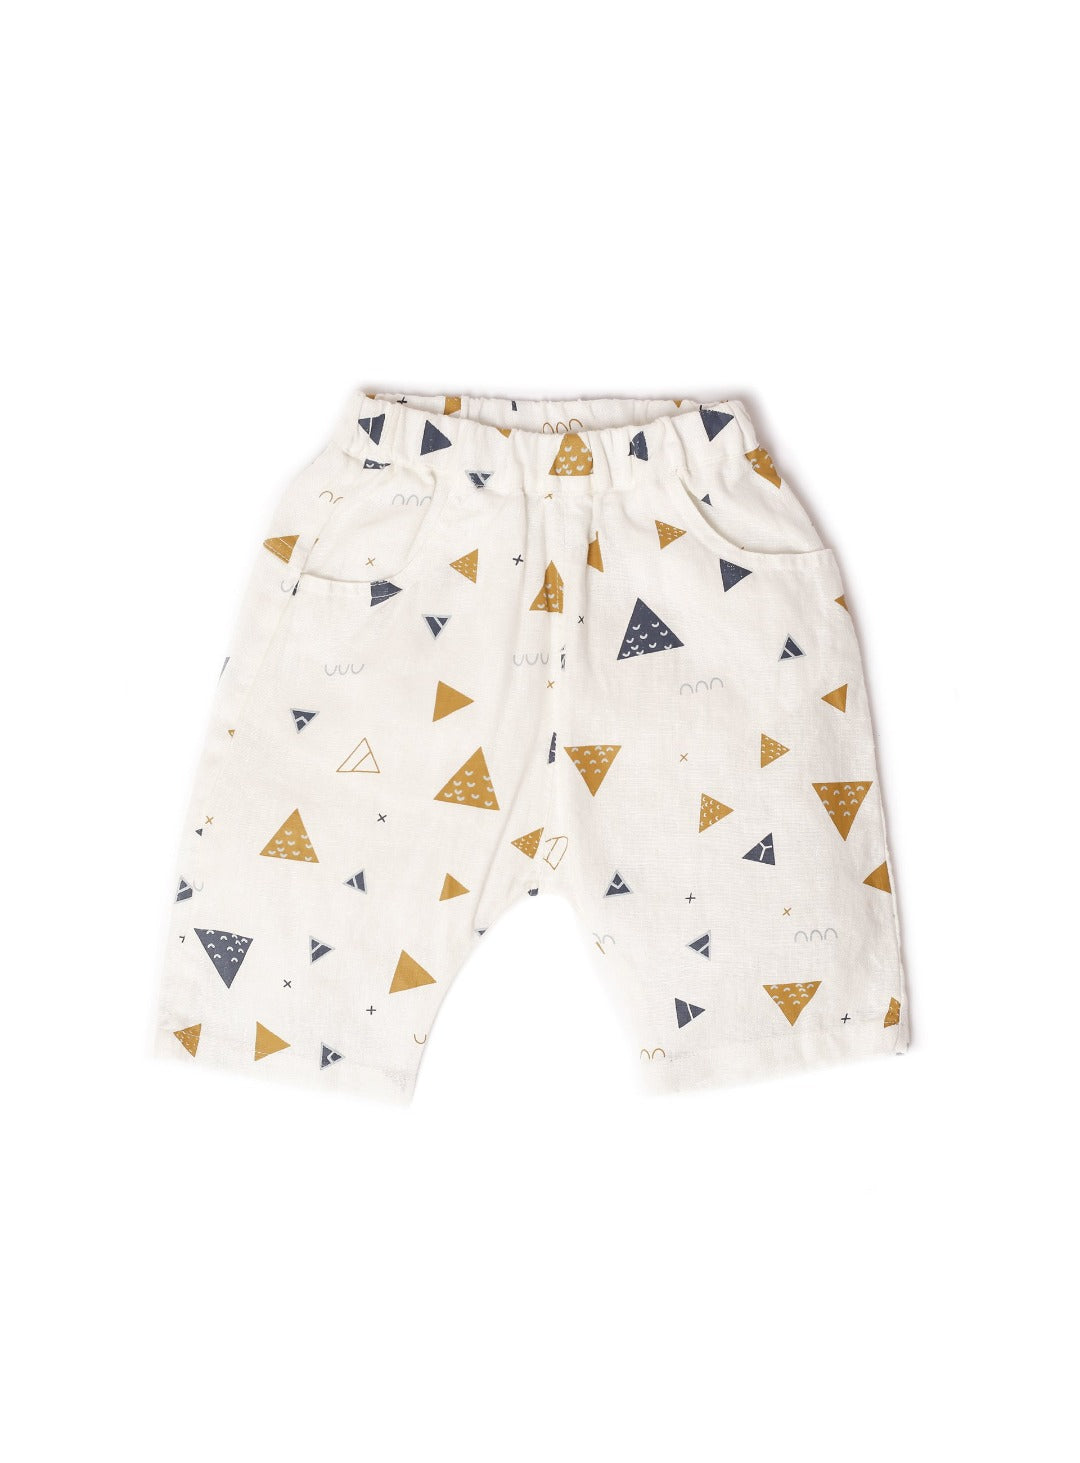 cloud white shorts with triangle prints